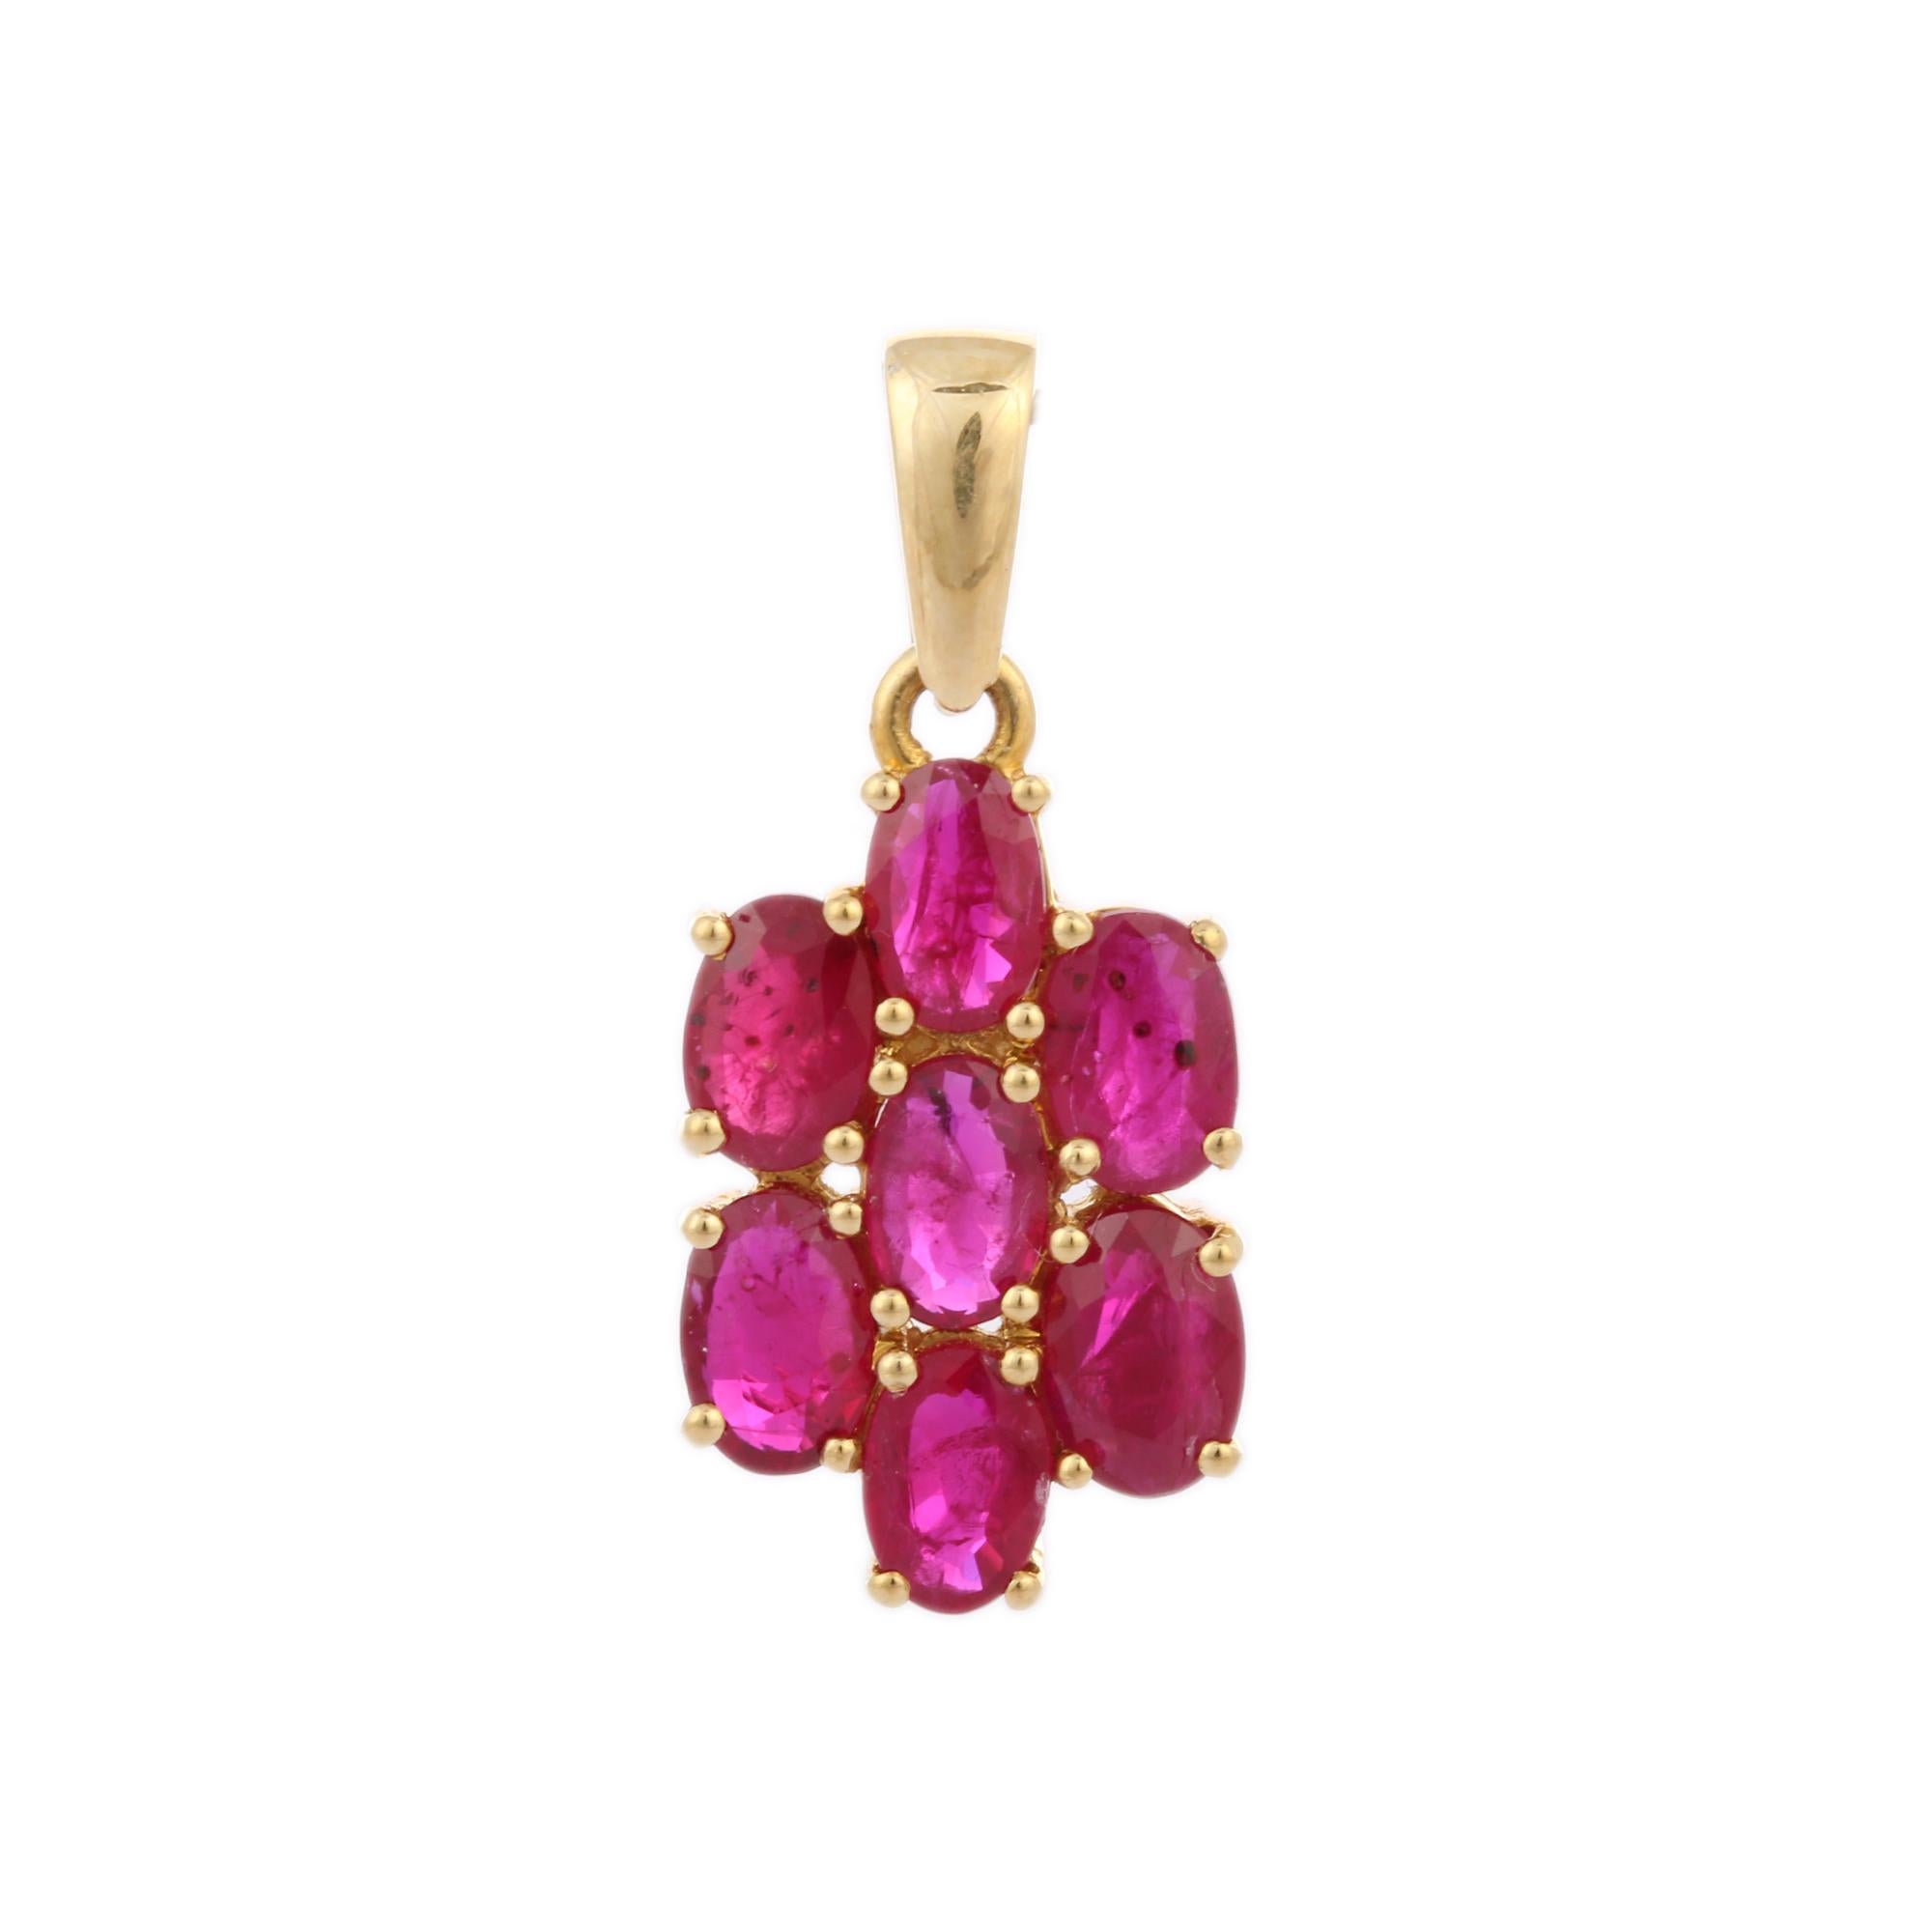 Women's 3.02 ct Alluring Oval Cut Ruby Flower Pendant in 14K Yellow Gold, Ruby Pendant For Sale